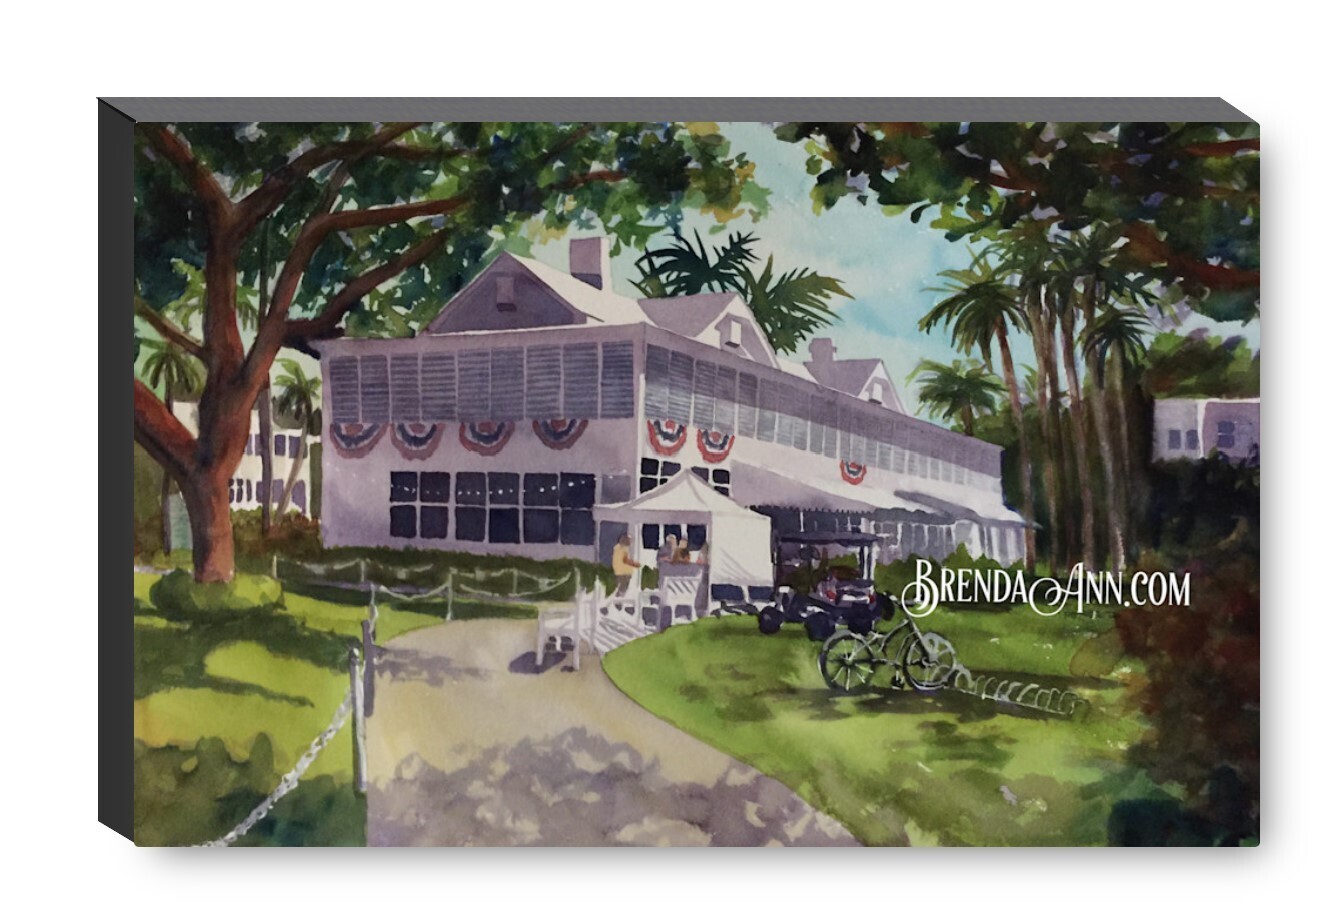 Harry S. Truman Little White House Key West Canvas Gallery Wrapped Print - Watercolor Art - Ready to hang on a wall